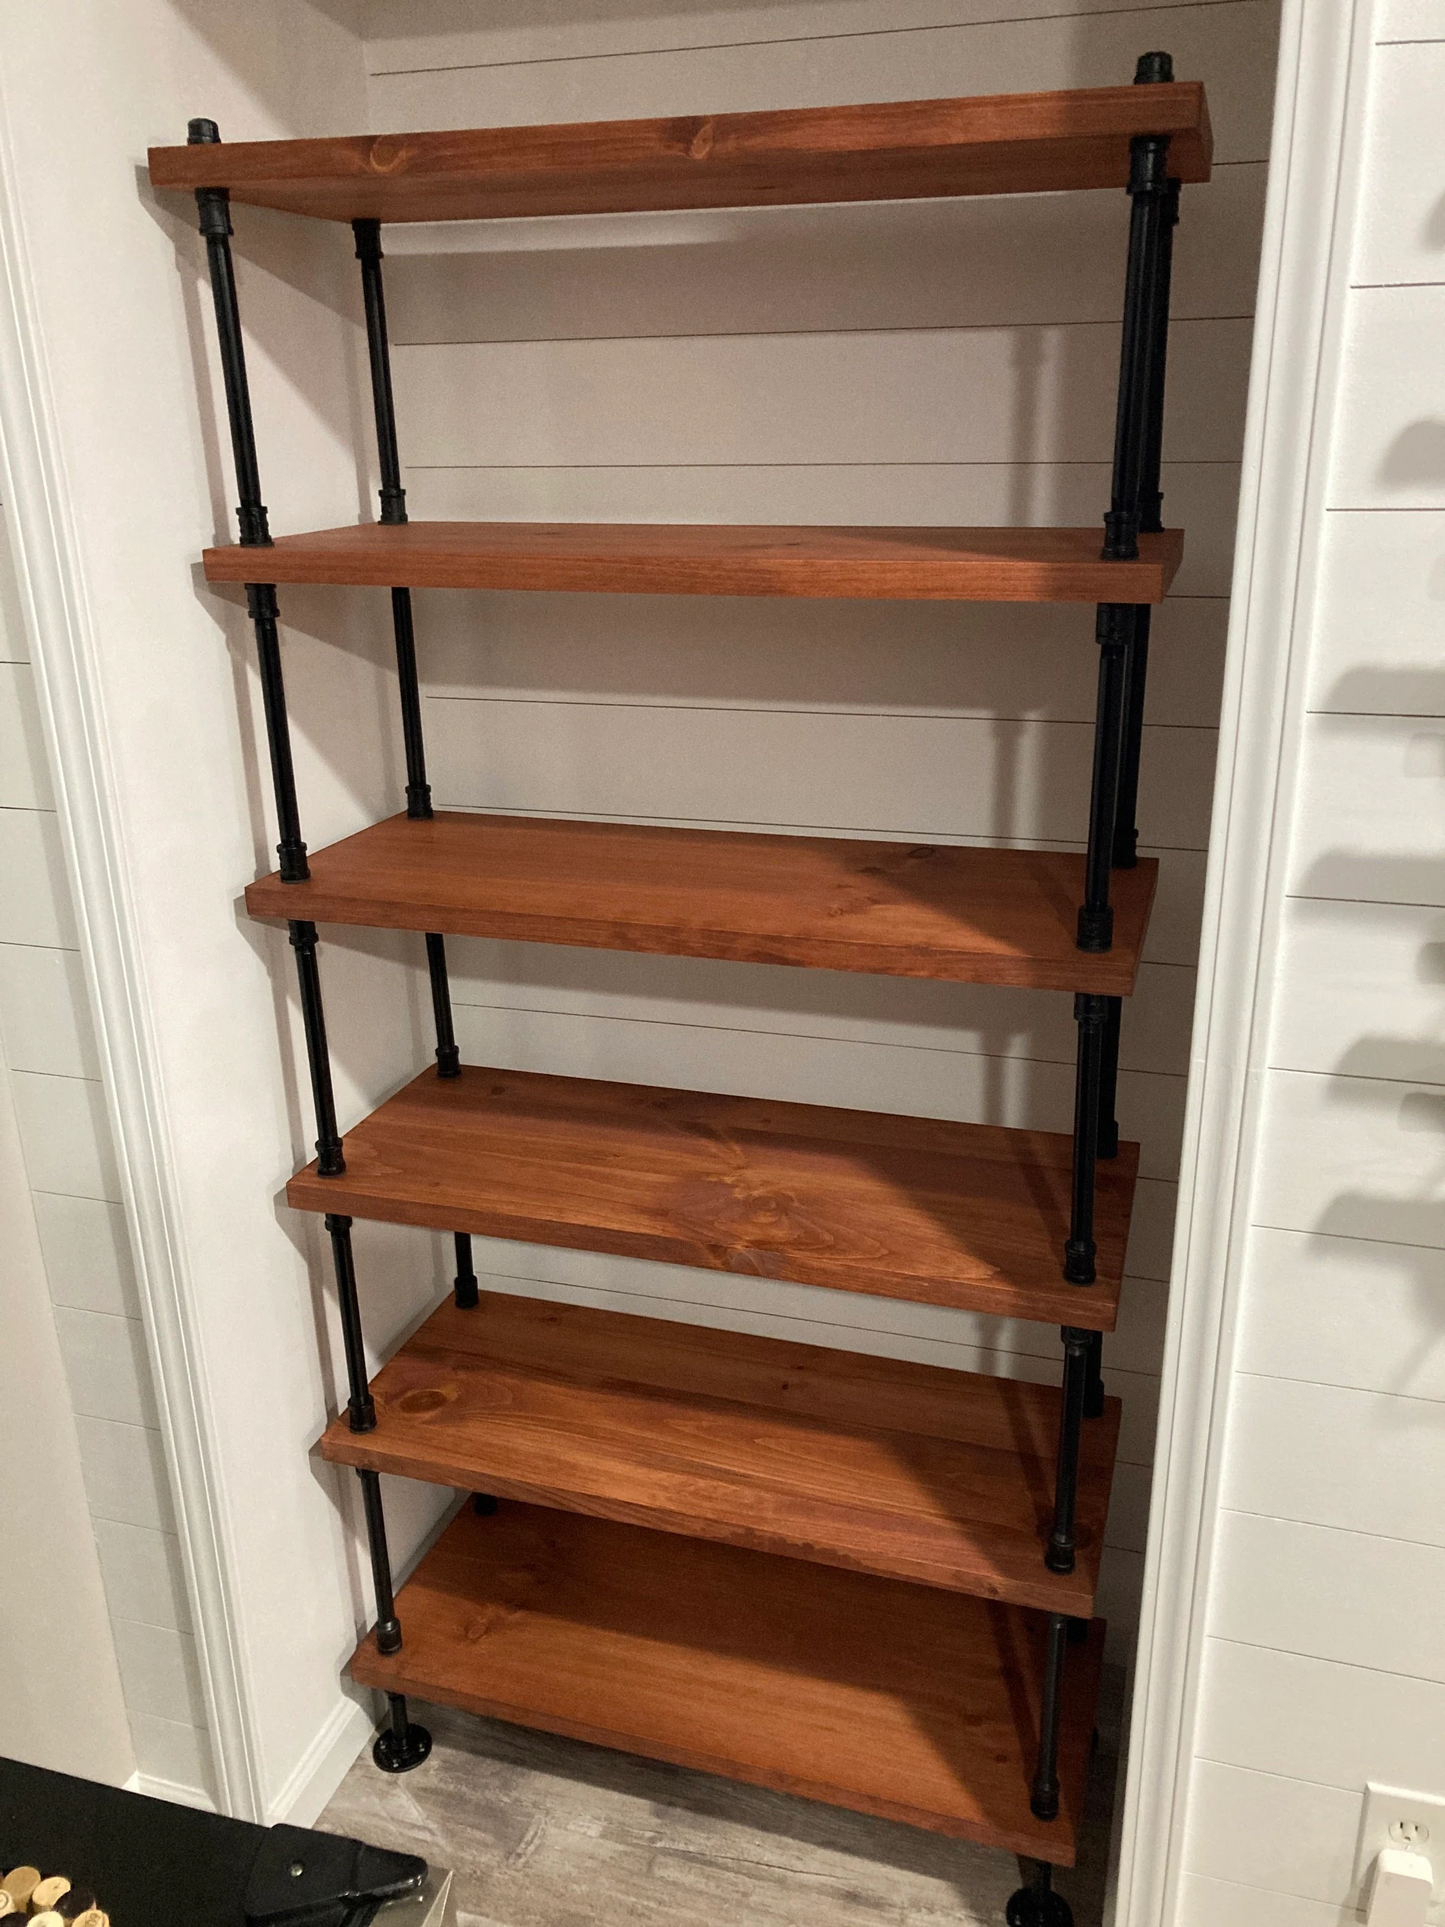 Bookcase sits in pantry kitchen nook with white walls. Bookcase is solid wood with balck iron pipe etagere frame. Shelves are solid pine wood finished with gunstock Minwax stain. Shelves are 36 inches length by 14 inches deep. Handmade bookcase by JT INDUSTRIAL DESIGNS in Texas.